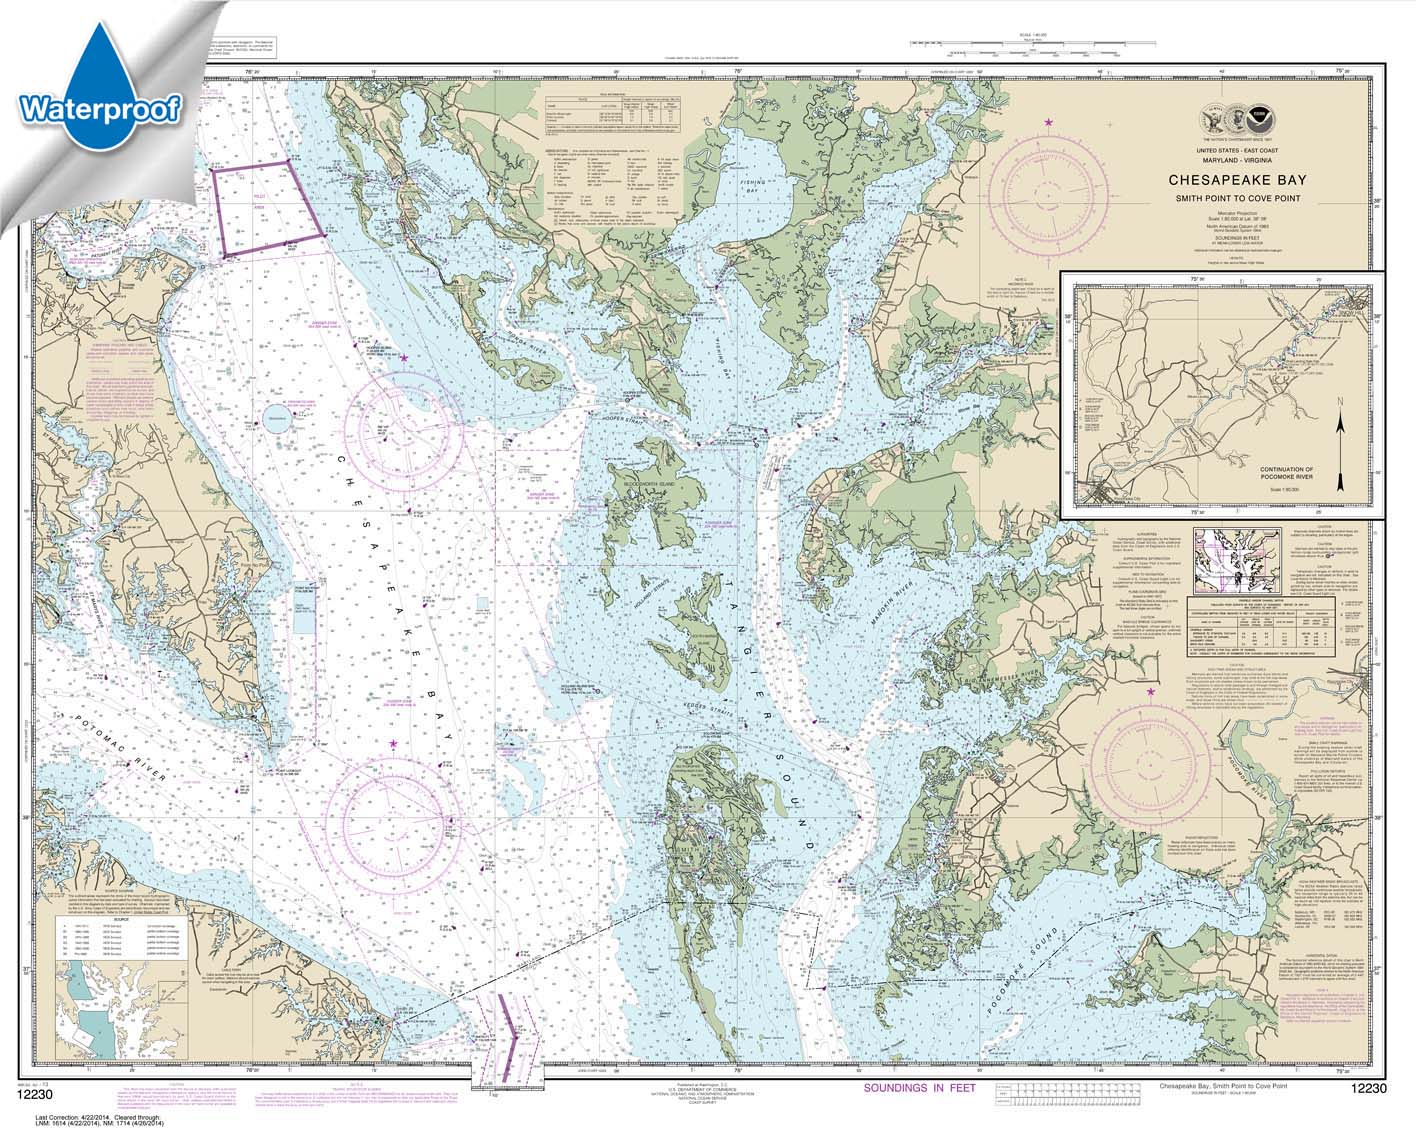 Chesapeake Bay Smith Point To Cove Point 12230 Nautical Charts